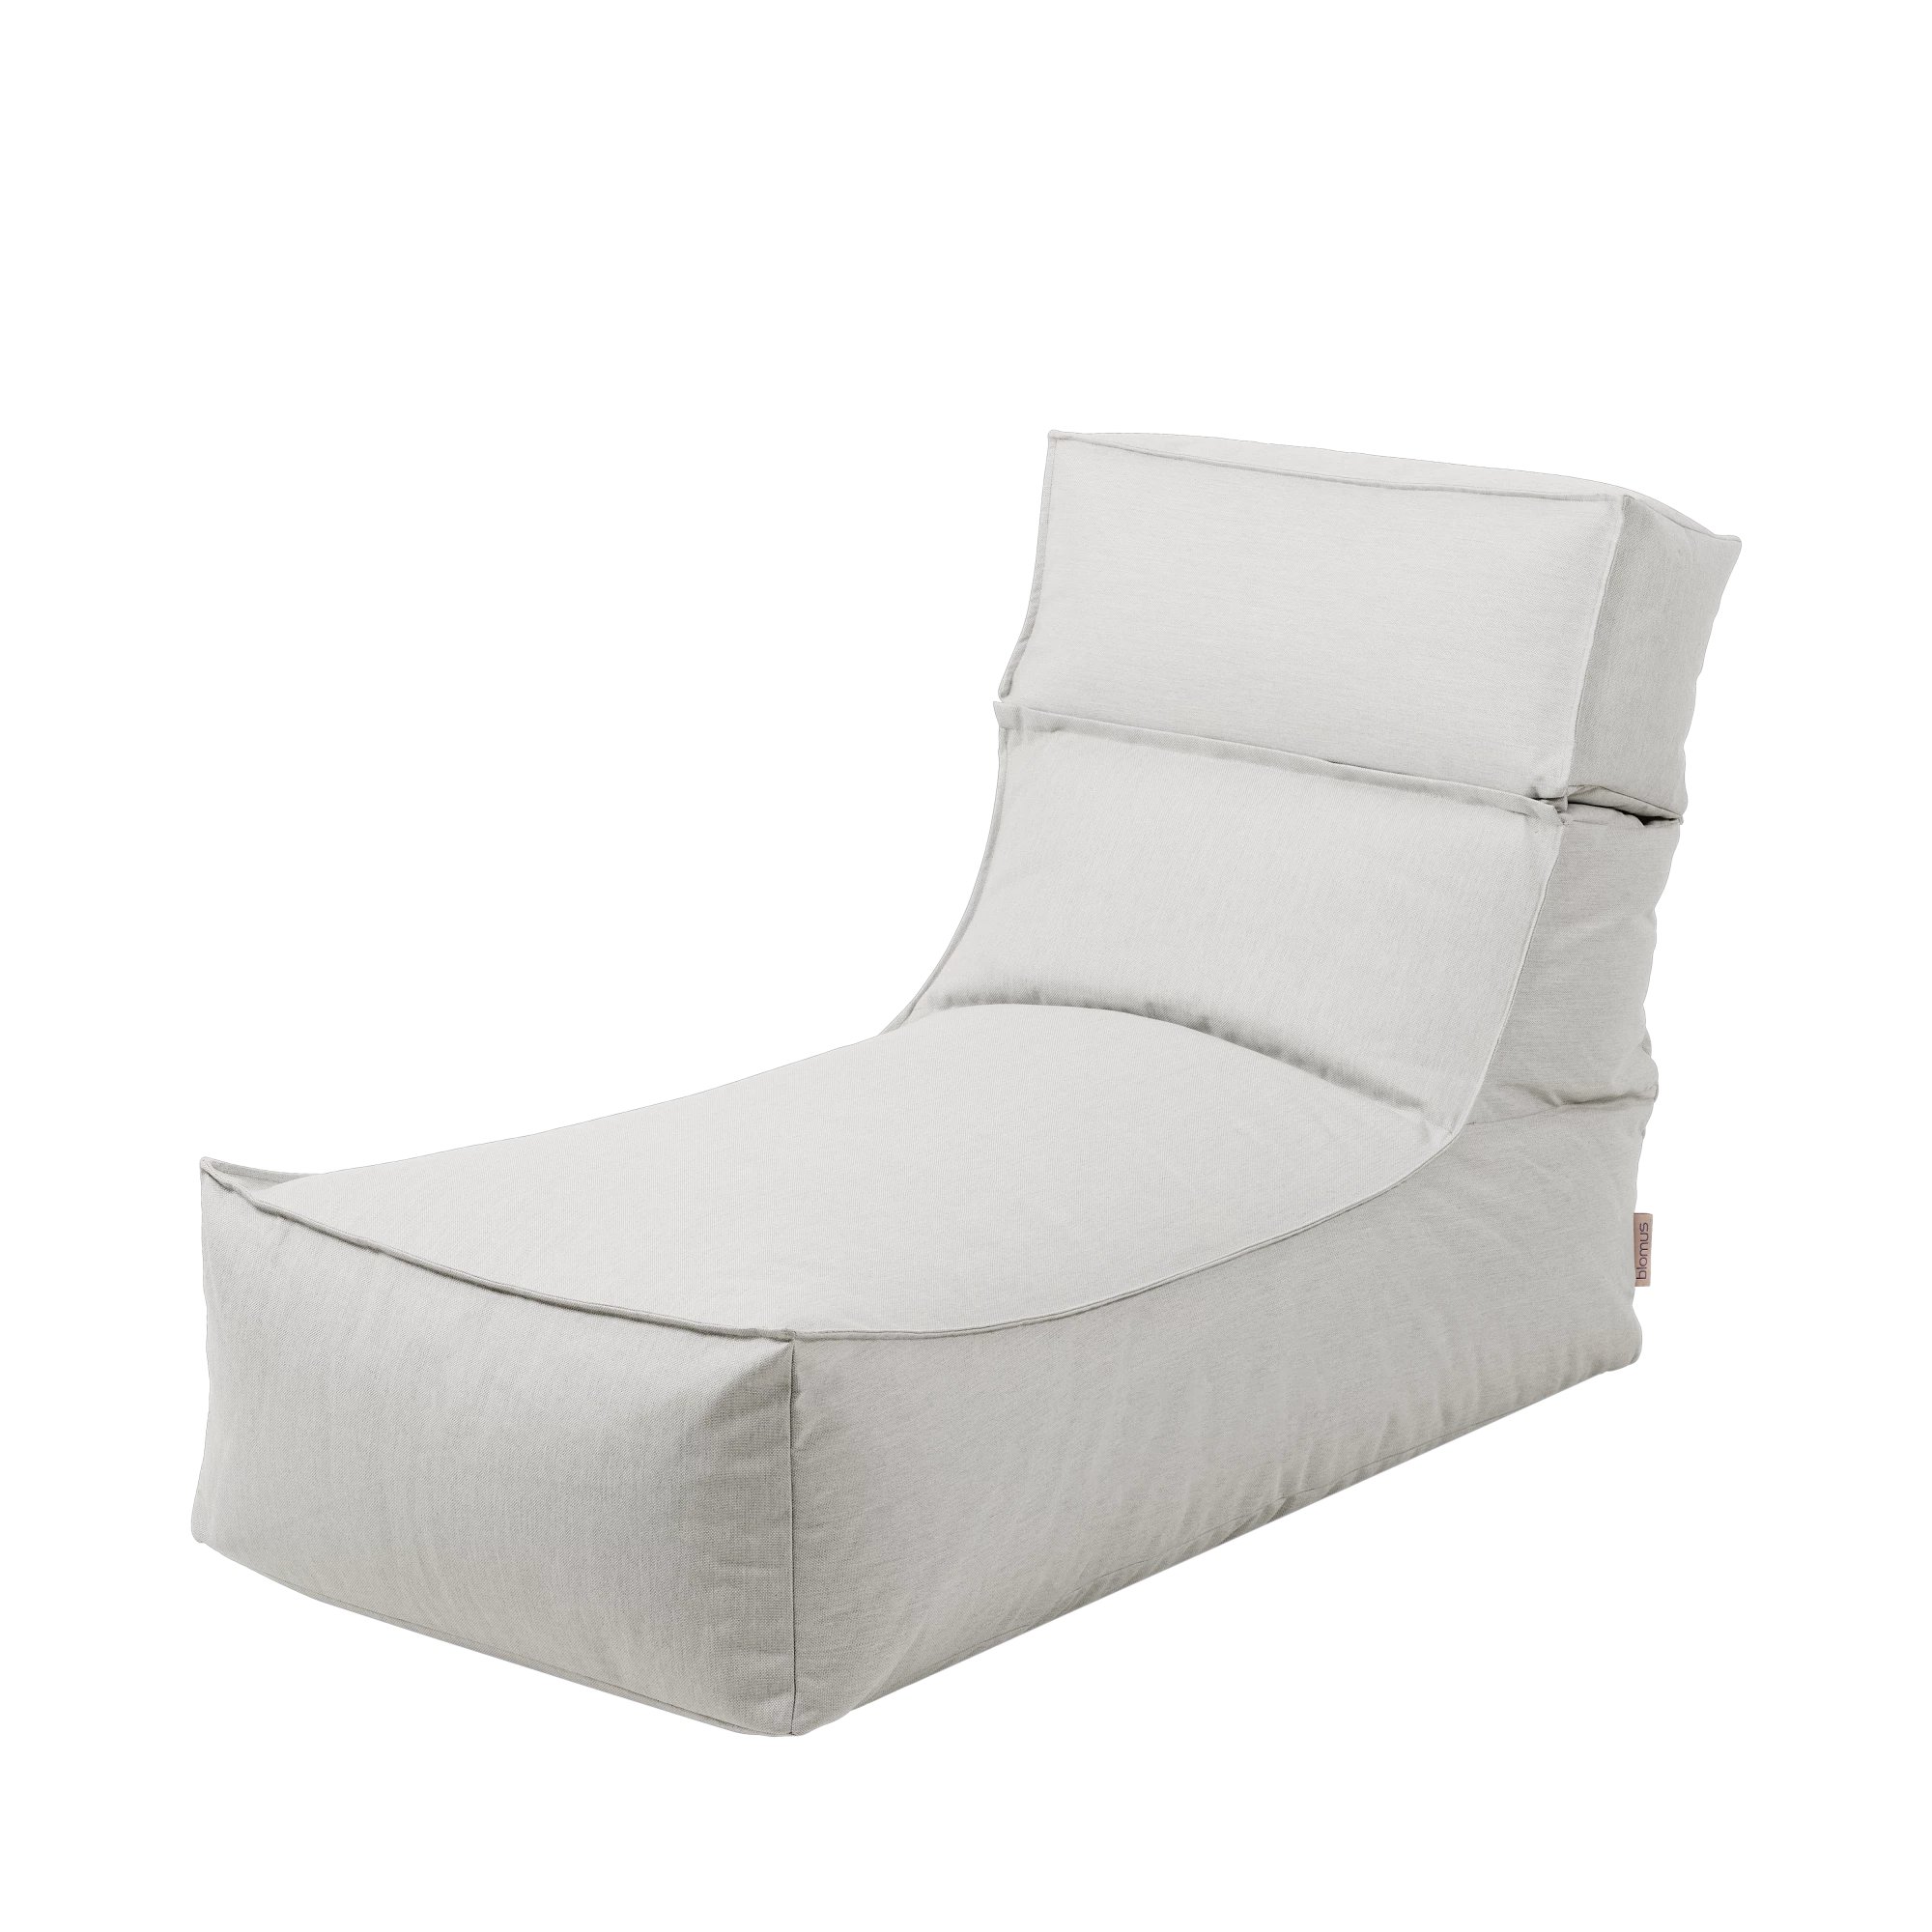 BLOMUS // STAY - OUTDOOR LOUNGER | CLOUD